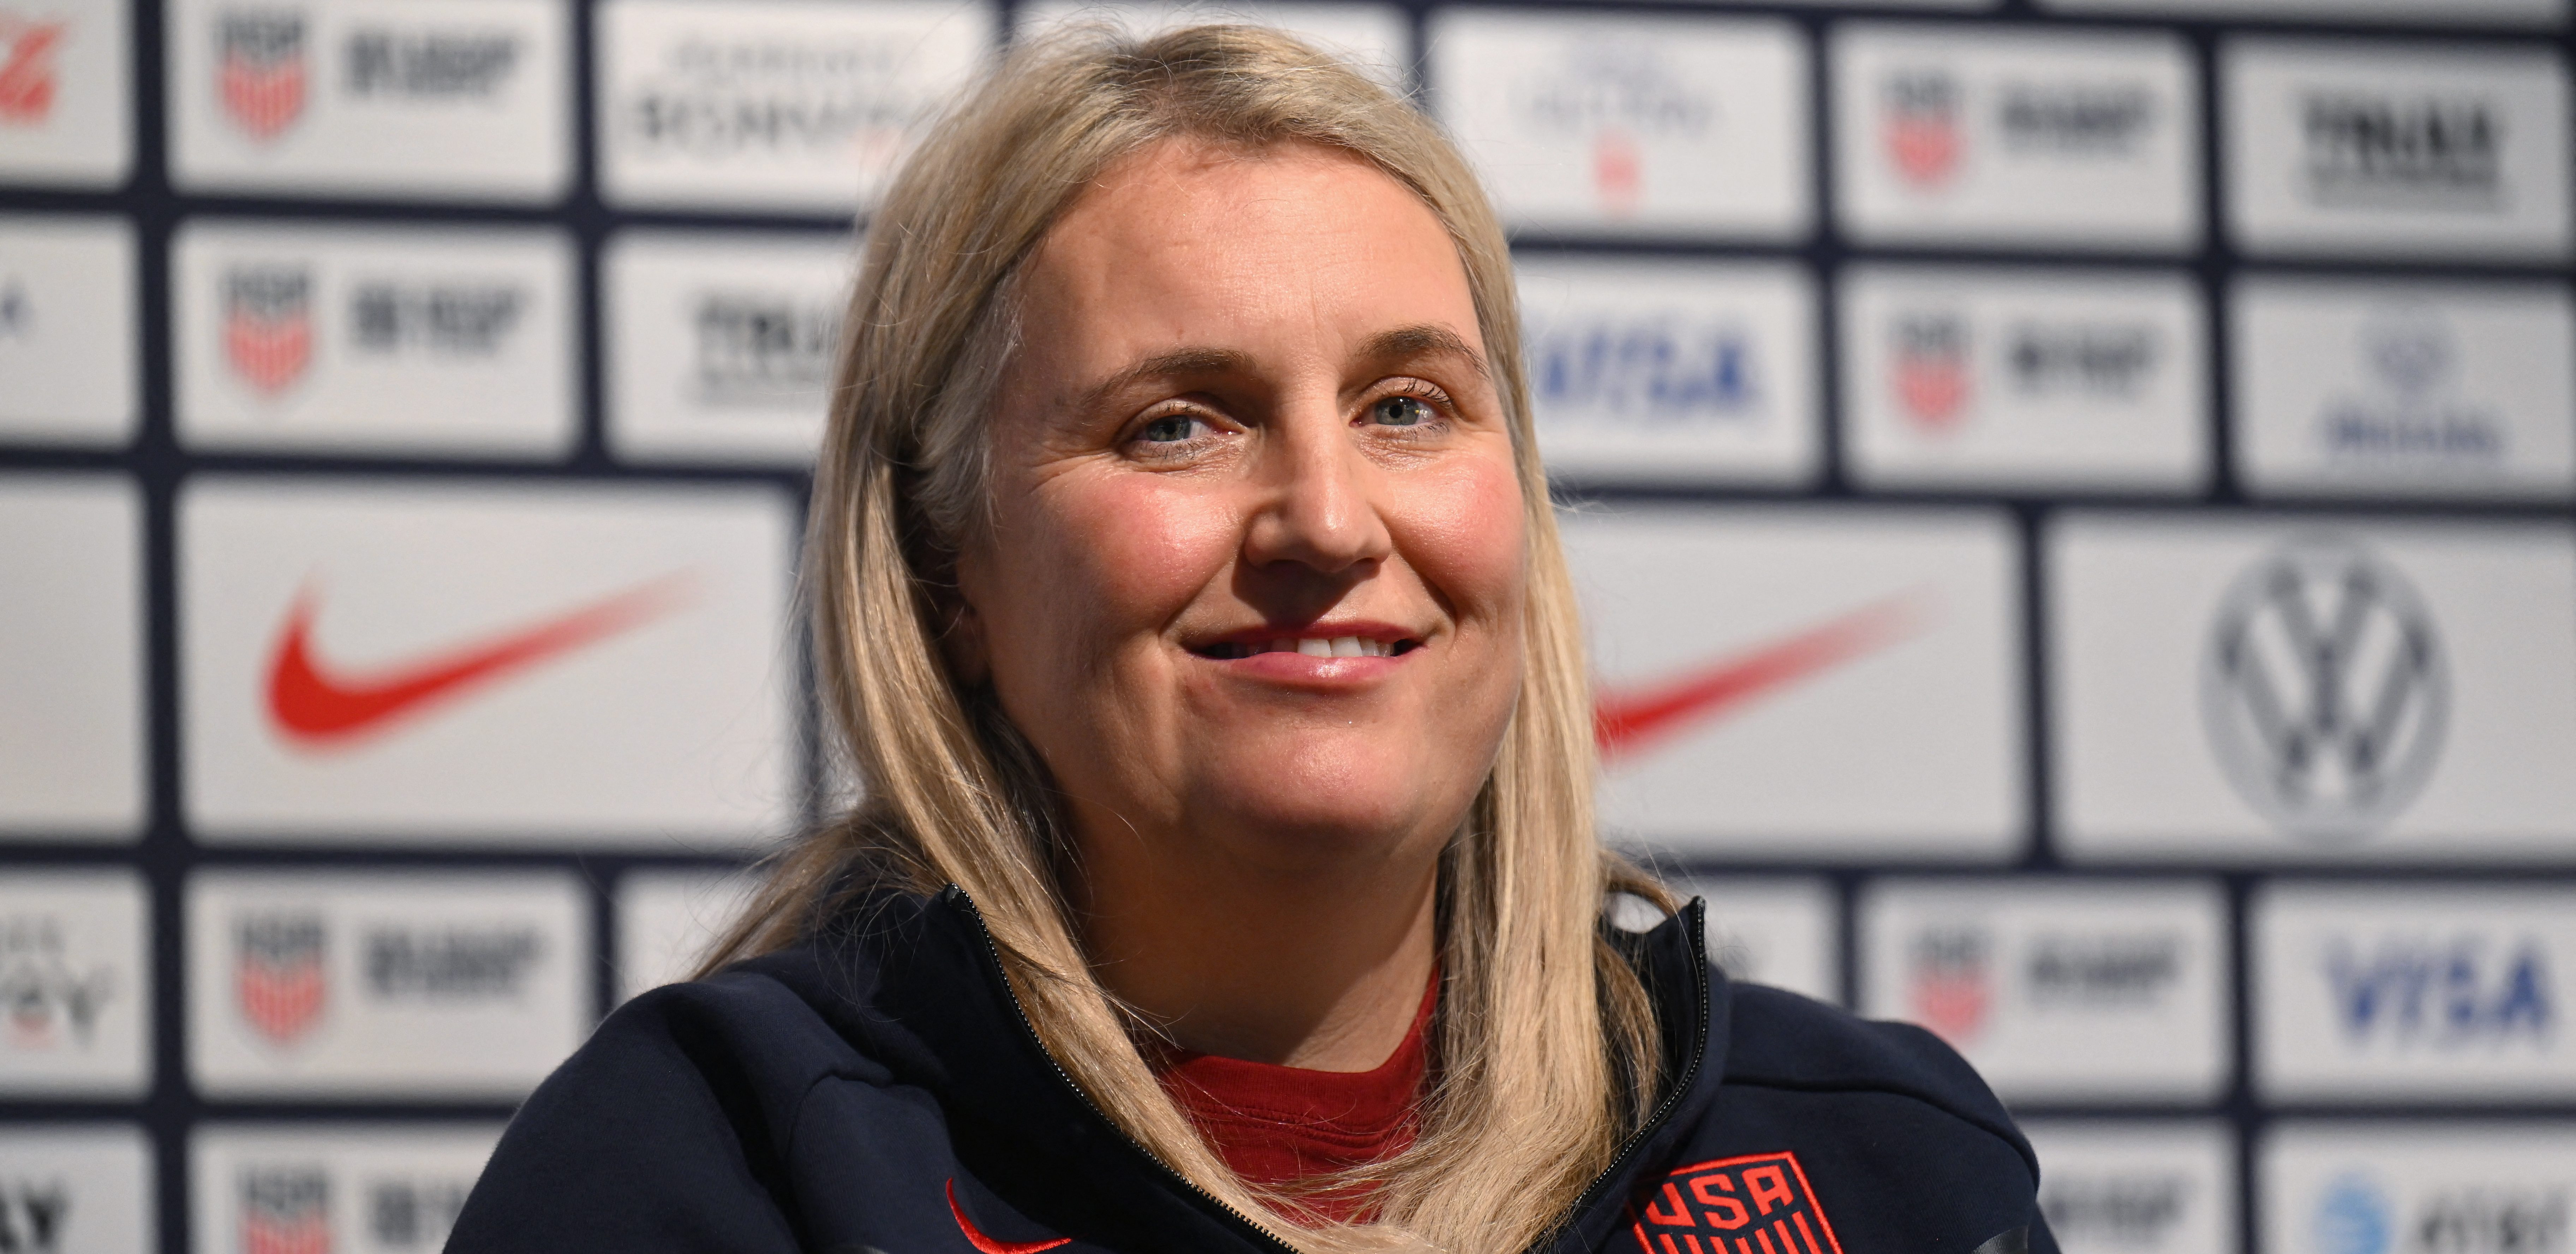 USWNT coach Emma Hayes sidesteps equal pay question if high-priced star takes over USMNT